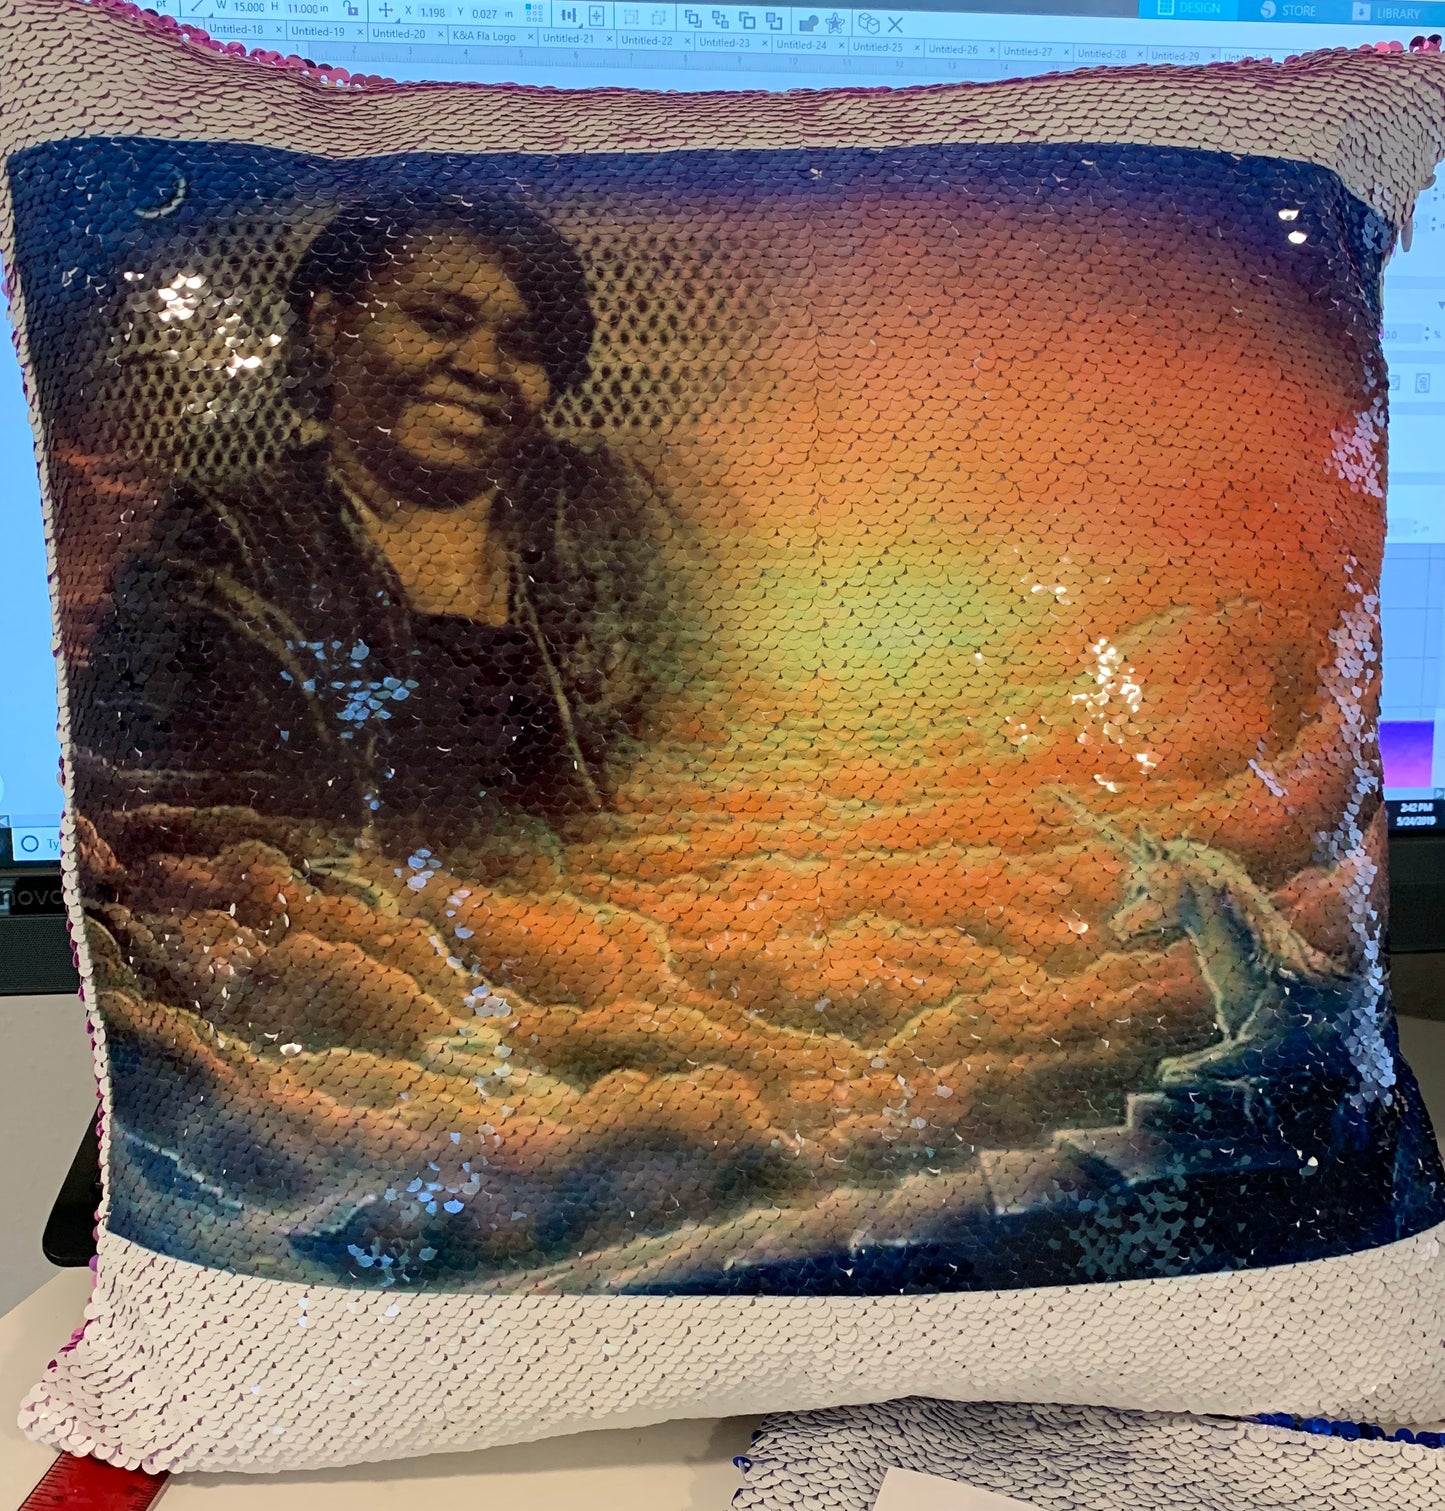 Picture Pillows